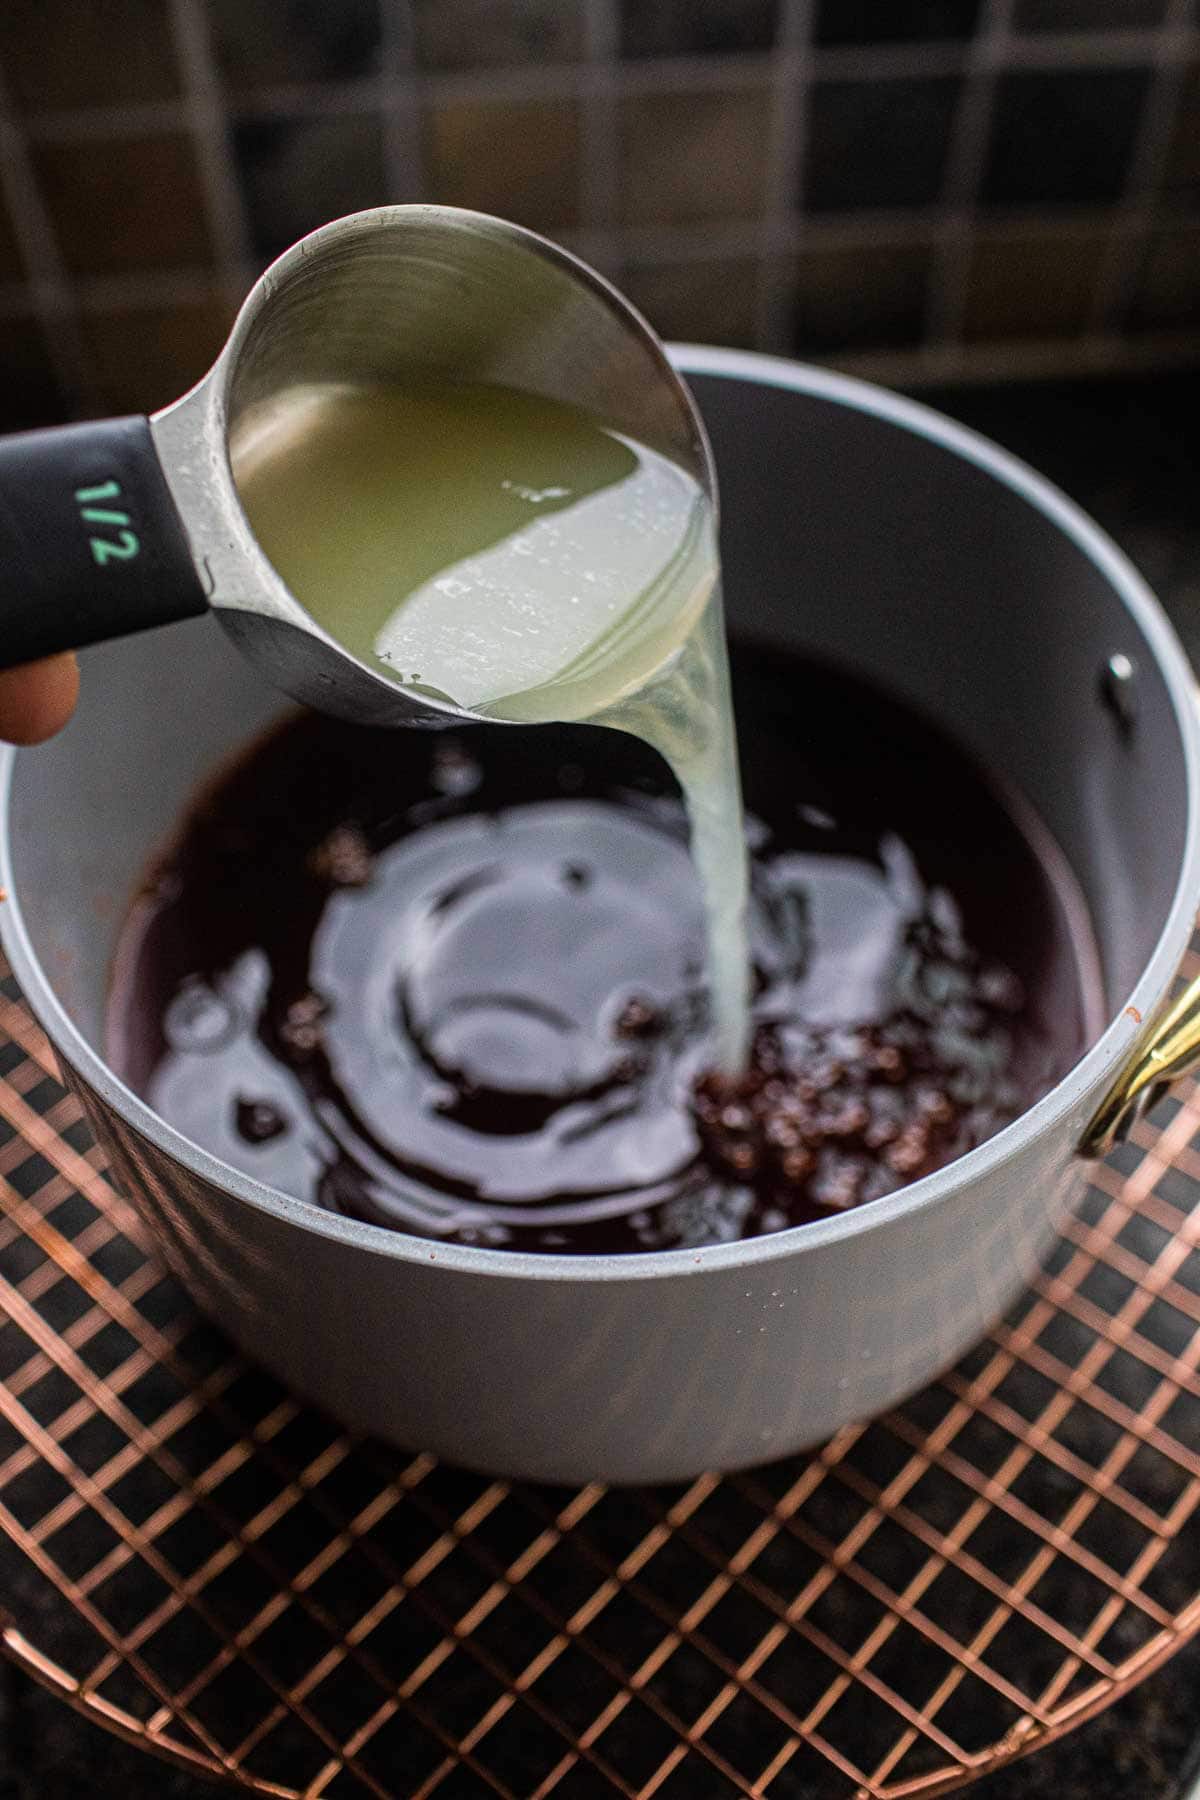 Lime juice pouring into a pot with tea.